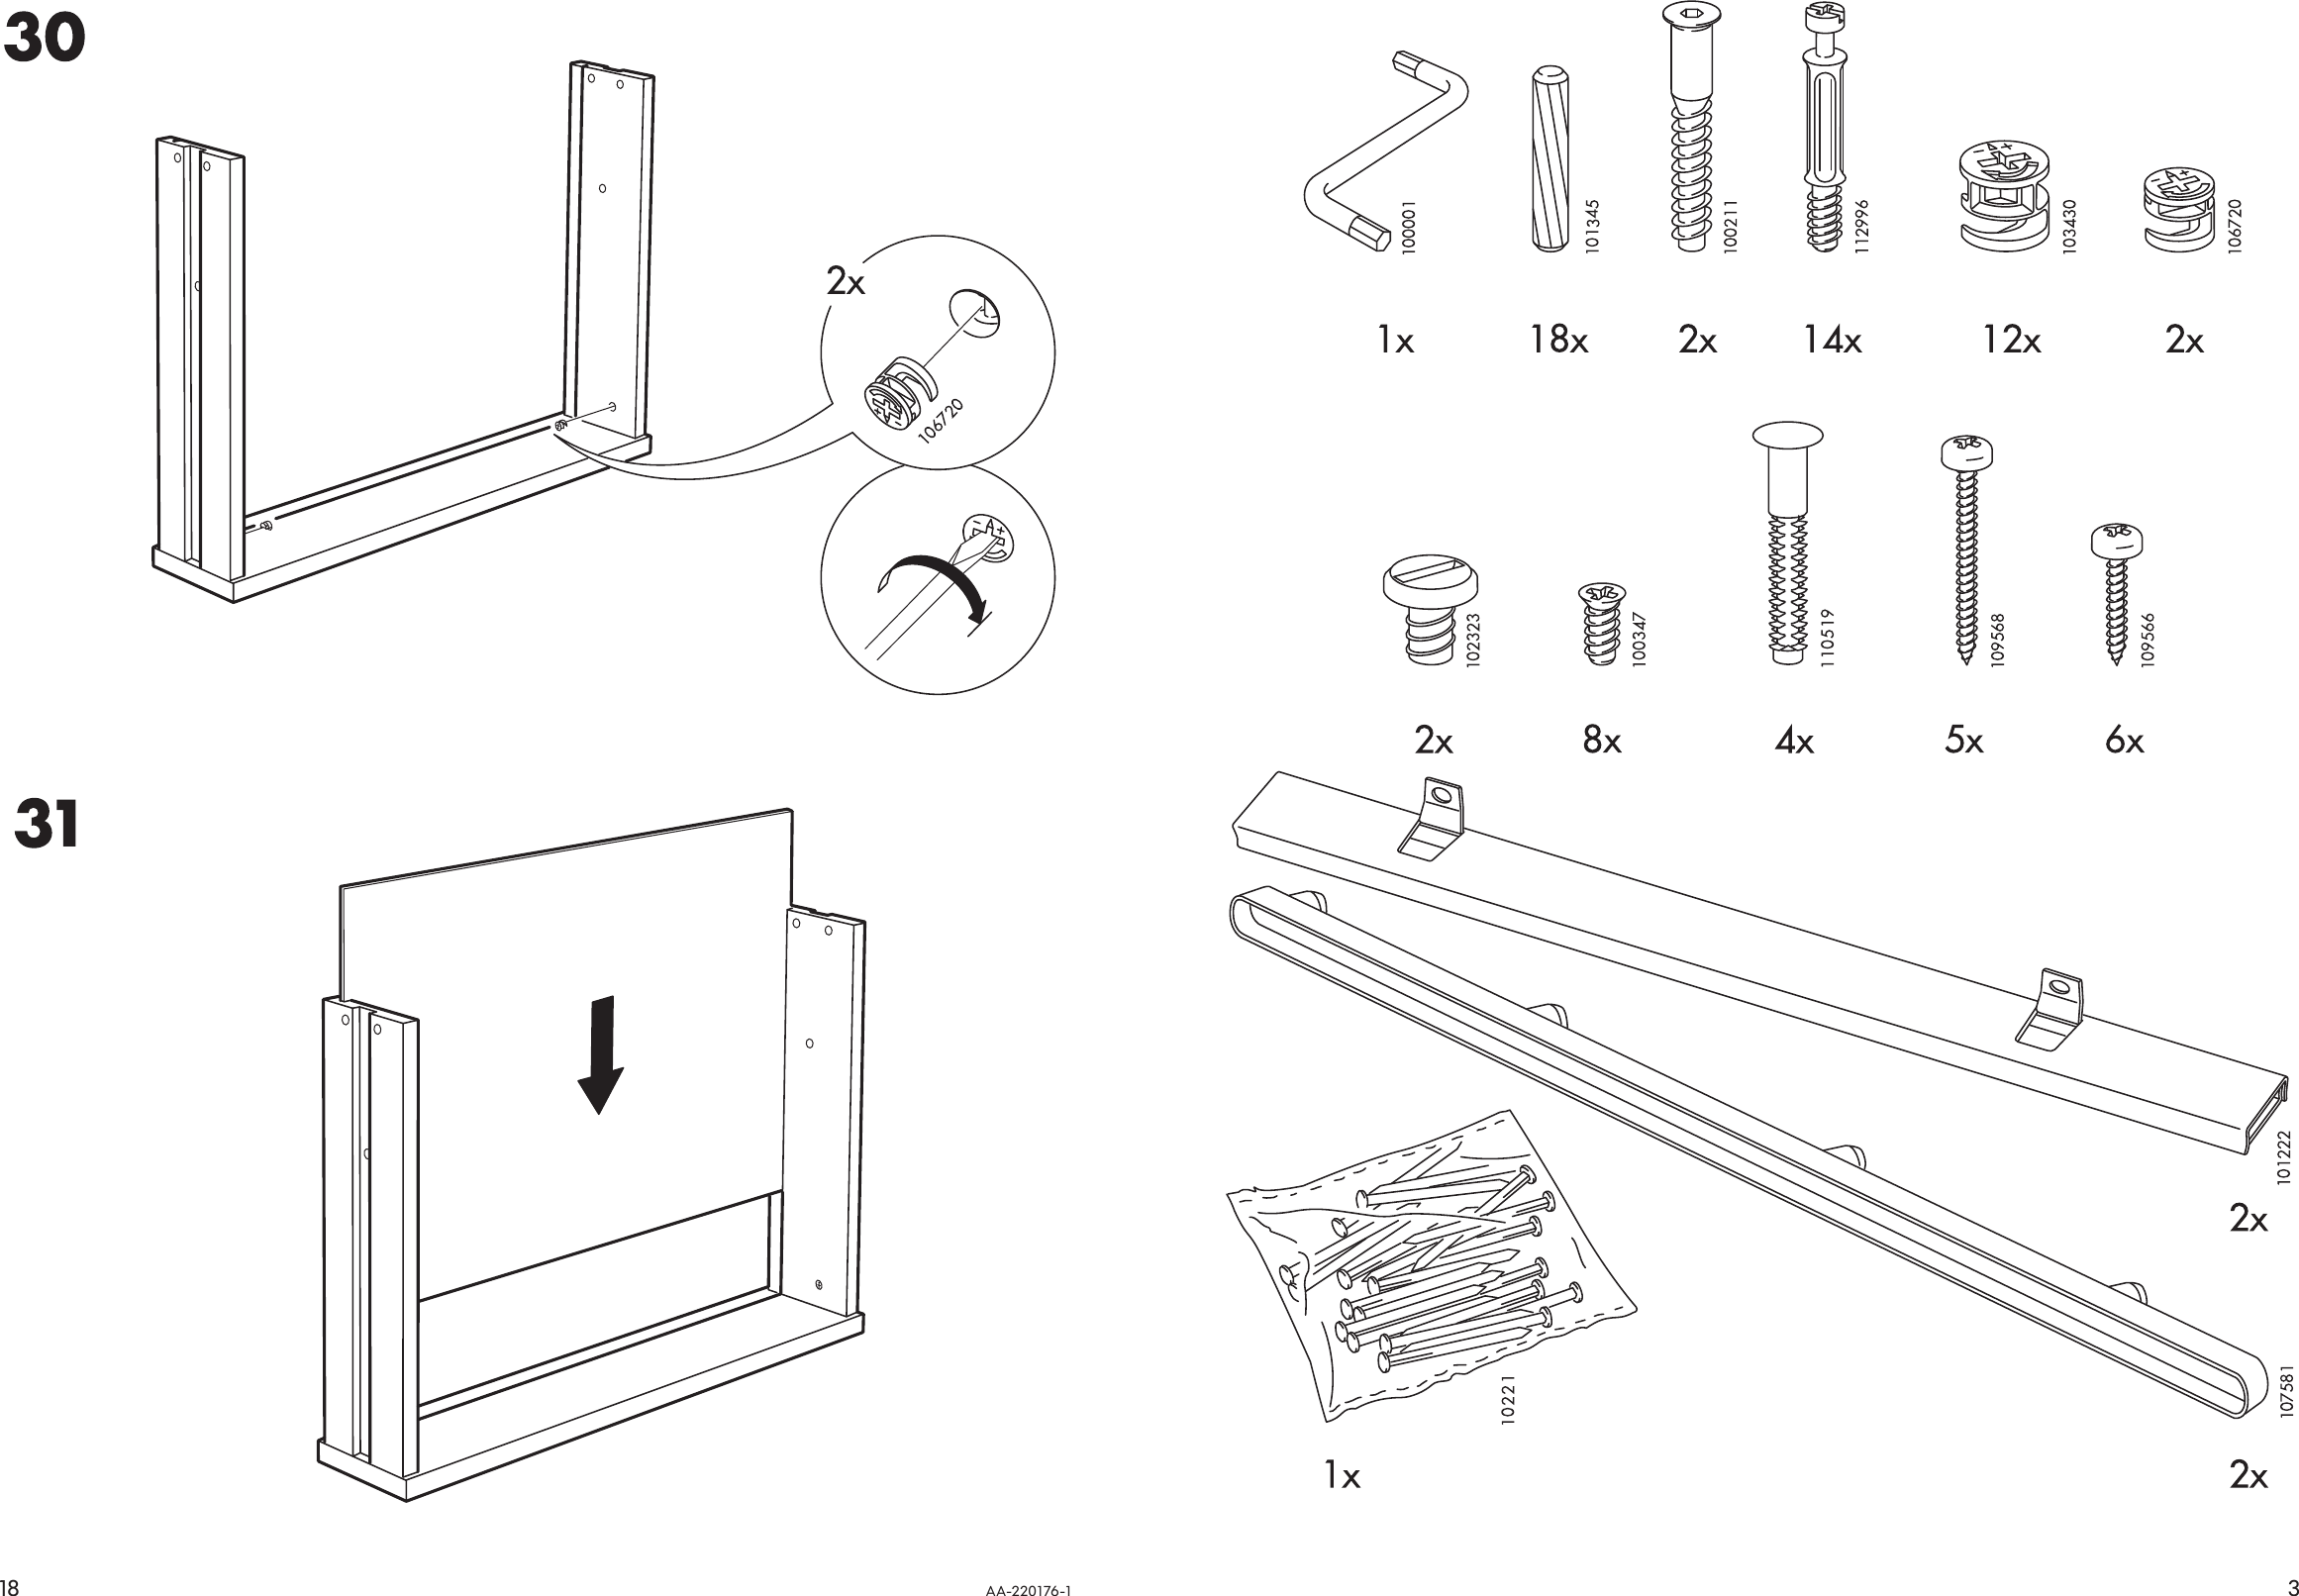 Page 3 of 10 - Ikea Ikea-Goliat-Computer-Desk-31X20-Assembly-Instruction